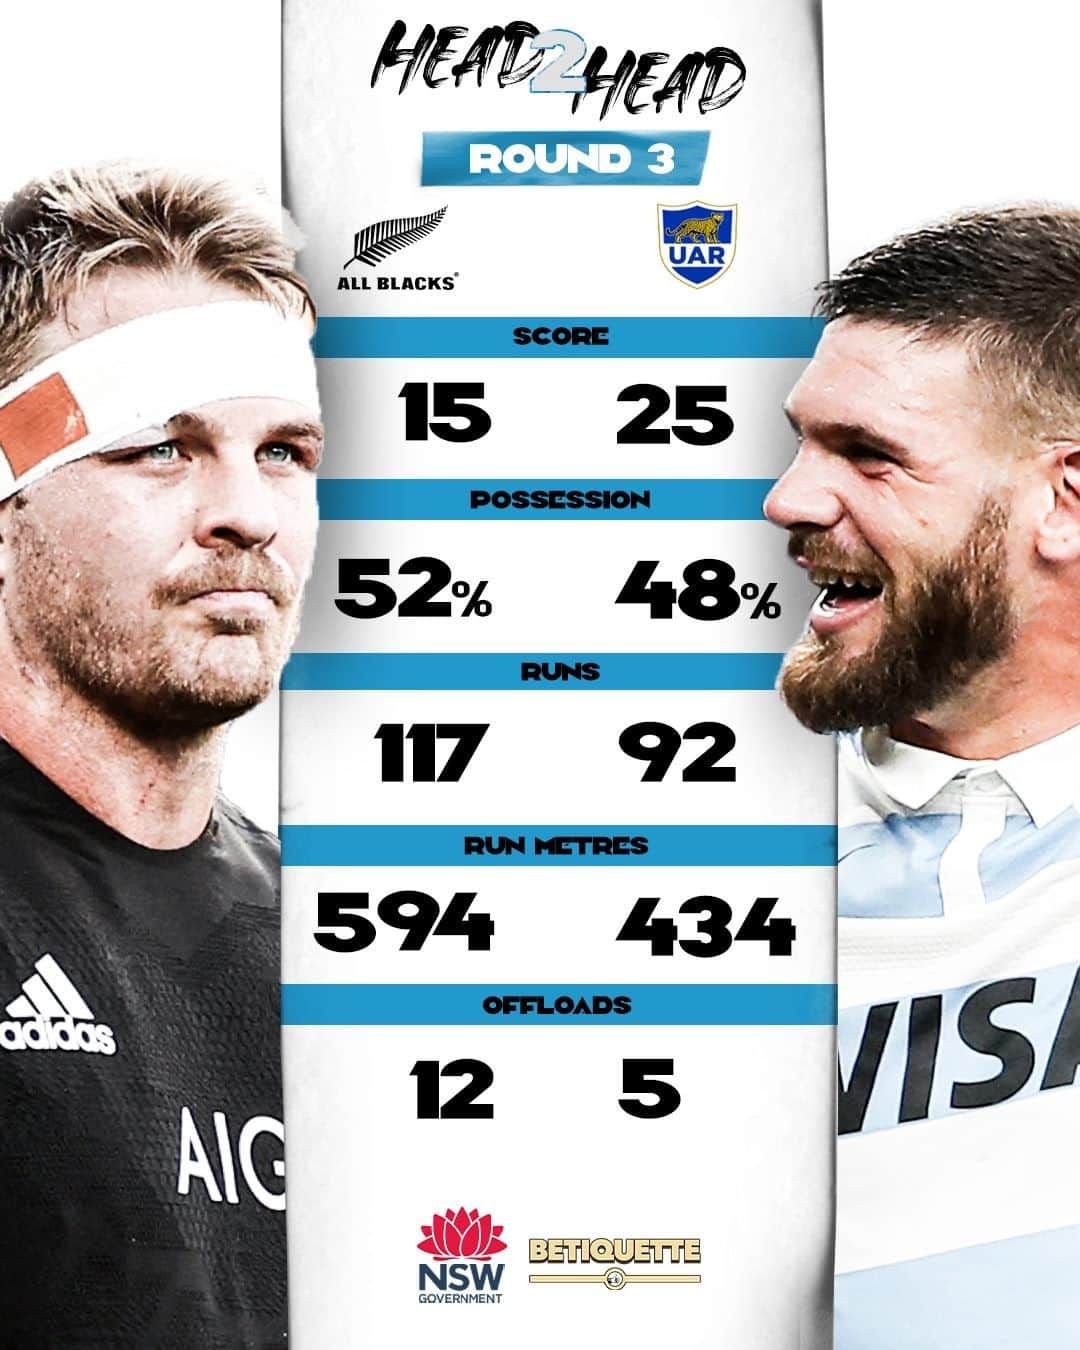 FOX・スポーツ・ラグビーのインスタグラム：「Here's how things stacked up in round 3 👀 Will The Pumas produce another stunning upset victory over The All Blacks ⁉️ 🤔 #ARGvNZL #TriNations  Thanks to NSW Office of Responsible Gambling - Show some betiquette - using etiquette when betting」